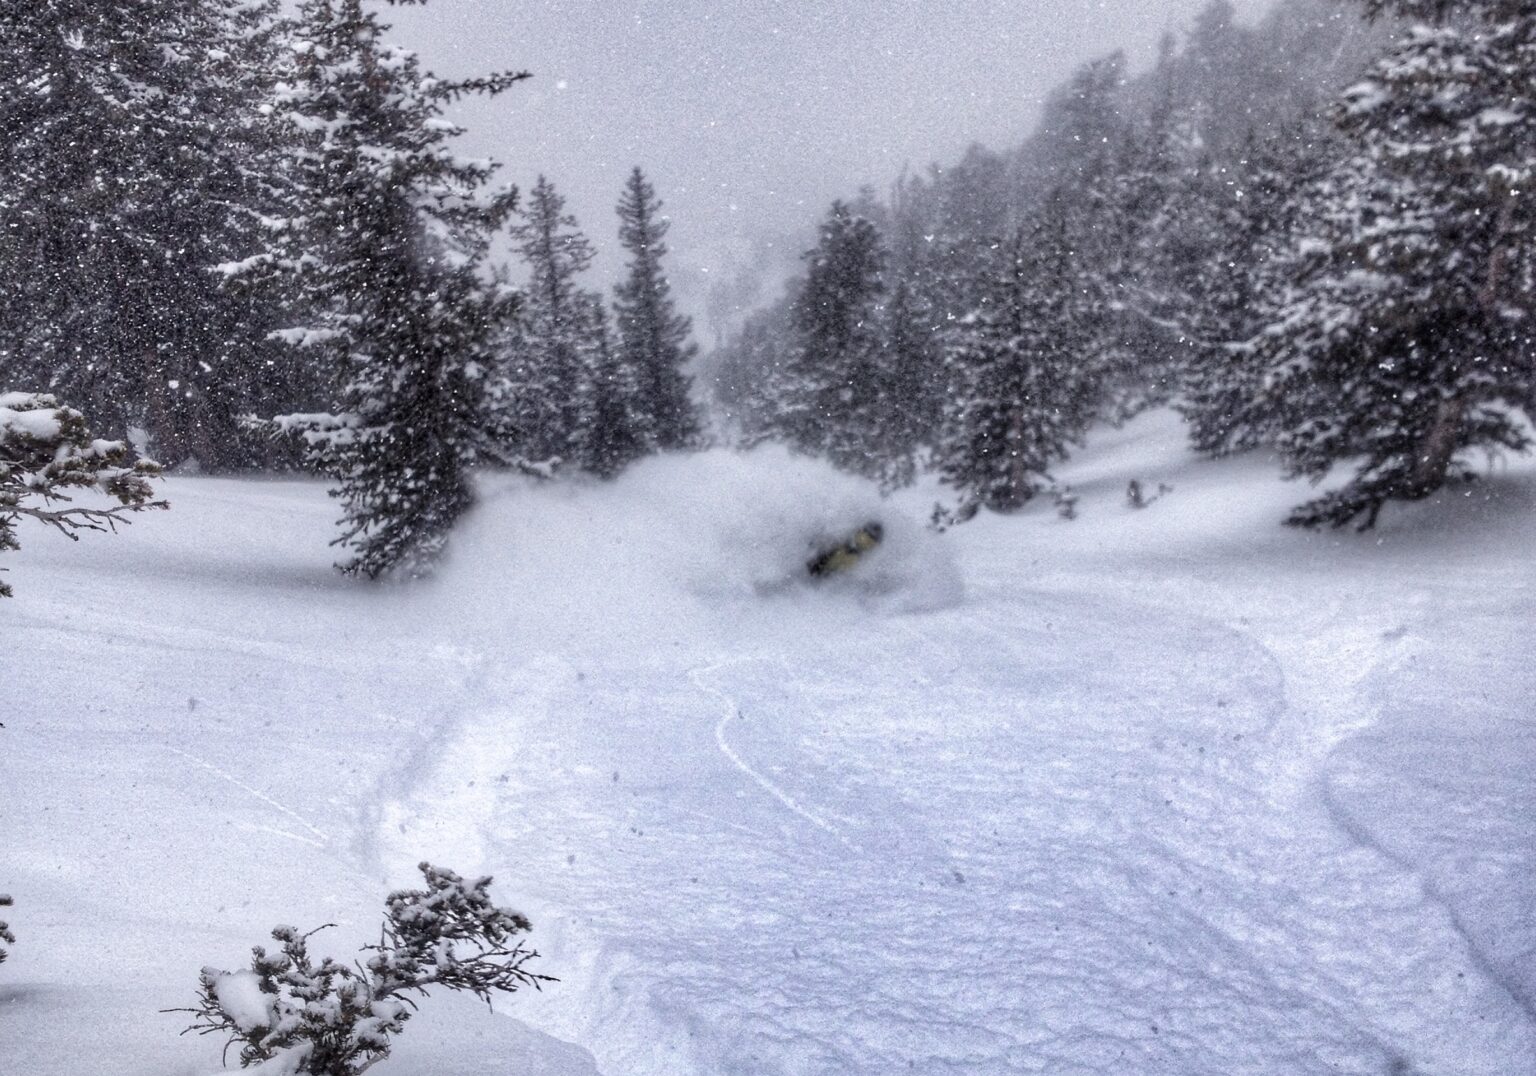 getting barrelled in the deep powder on Argenta West Face in the Wasatch Mountains of Utah